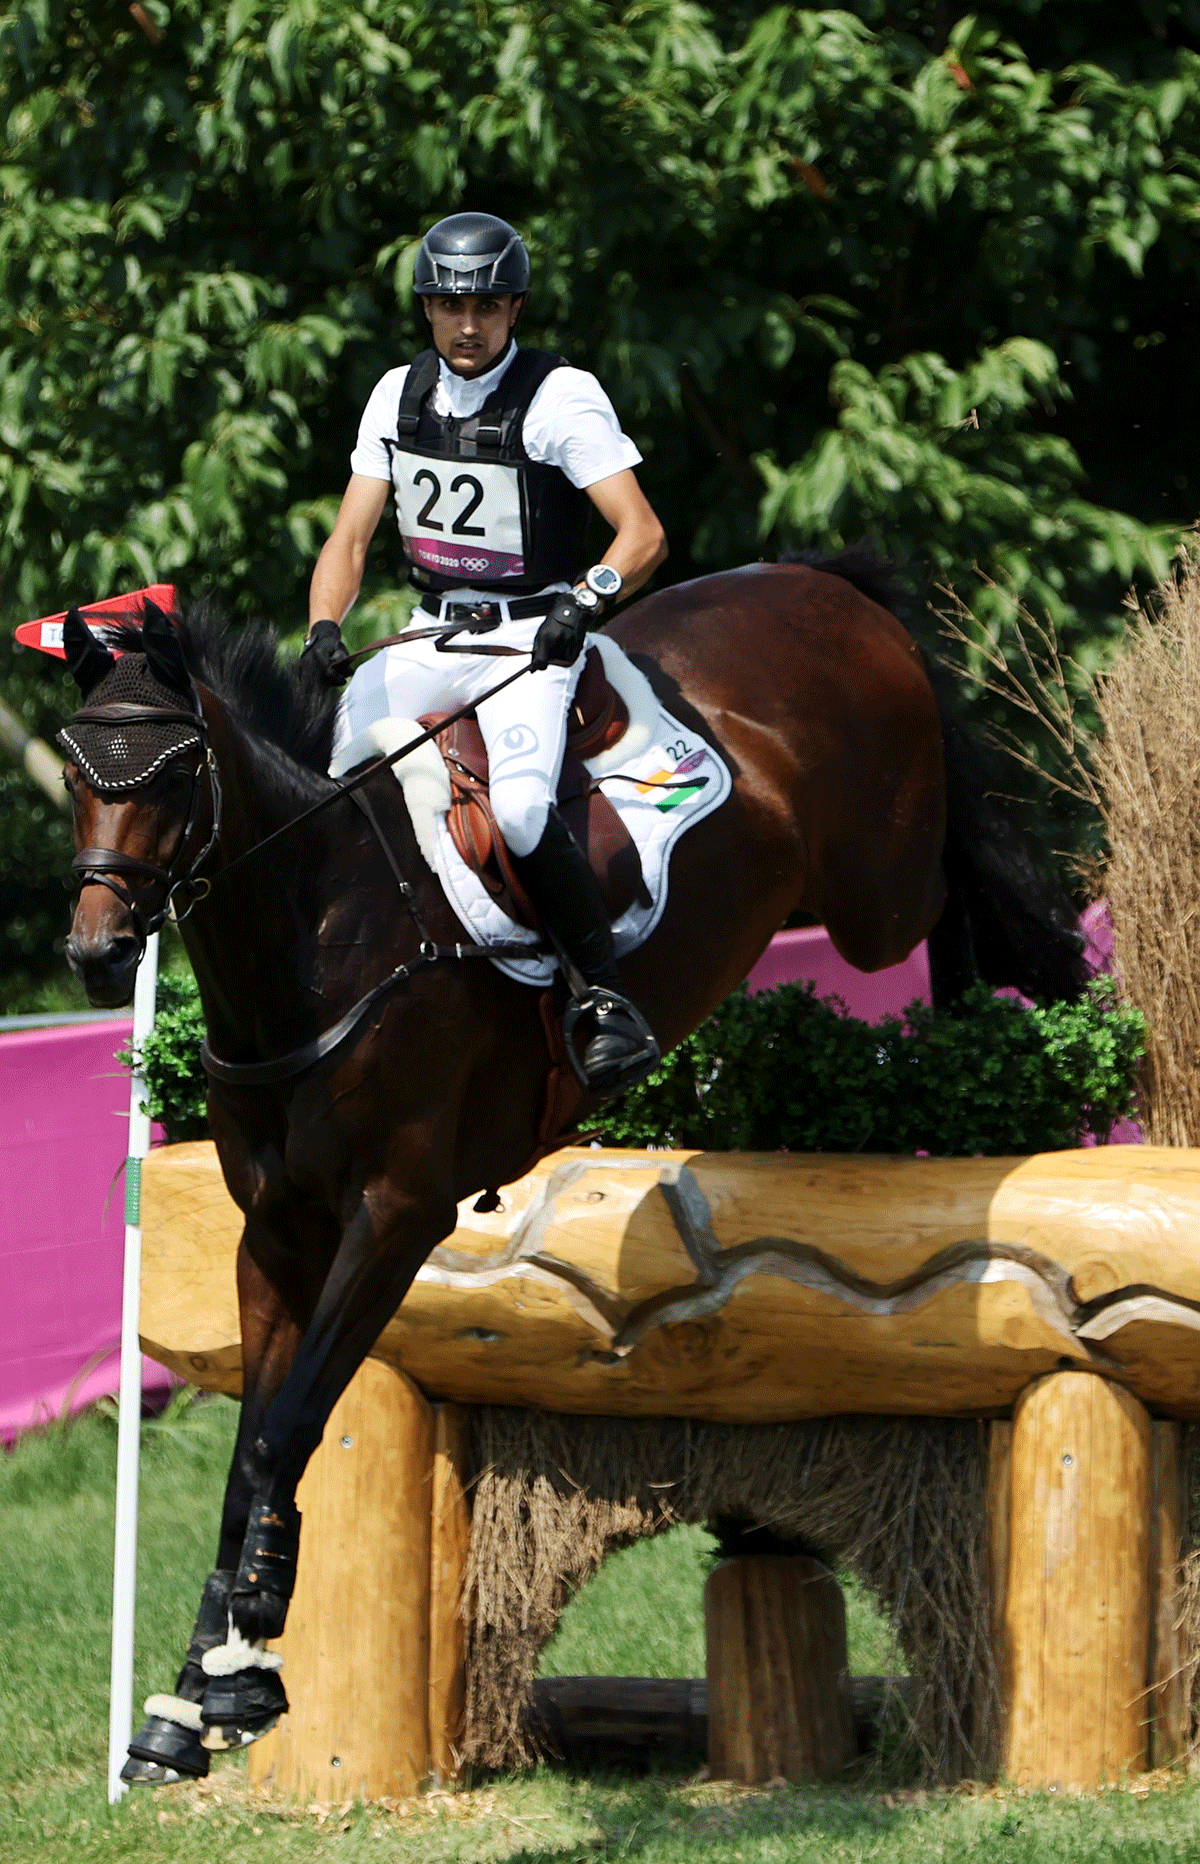 India's Fouaad Mirza and his horse Seigneur compete in the  Eventing Cross Country Individual final on Sunday